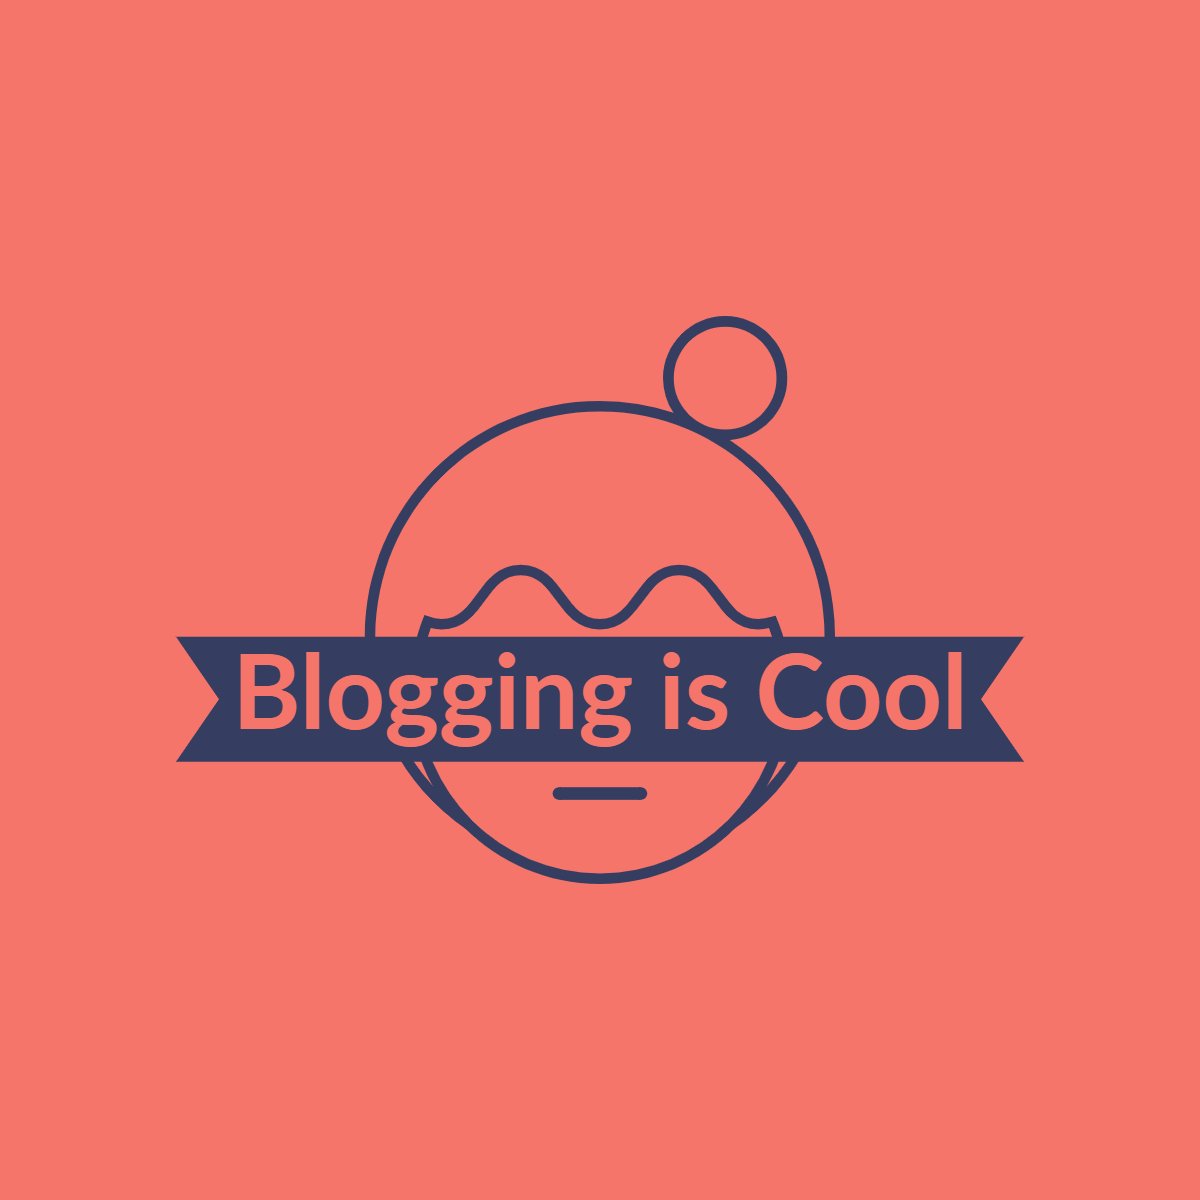 Bloggingiscool.com How to Easily Create an Online Course to Add to Your Blog